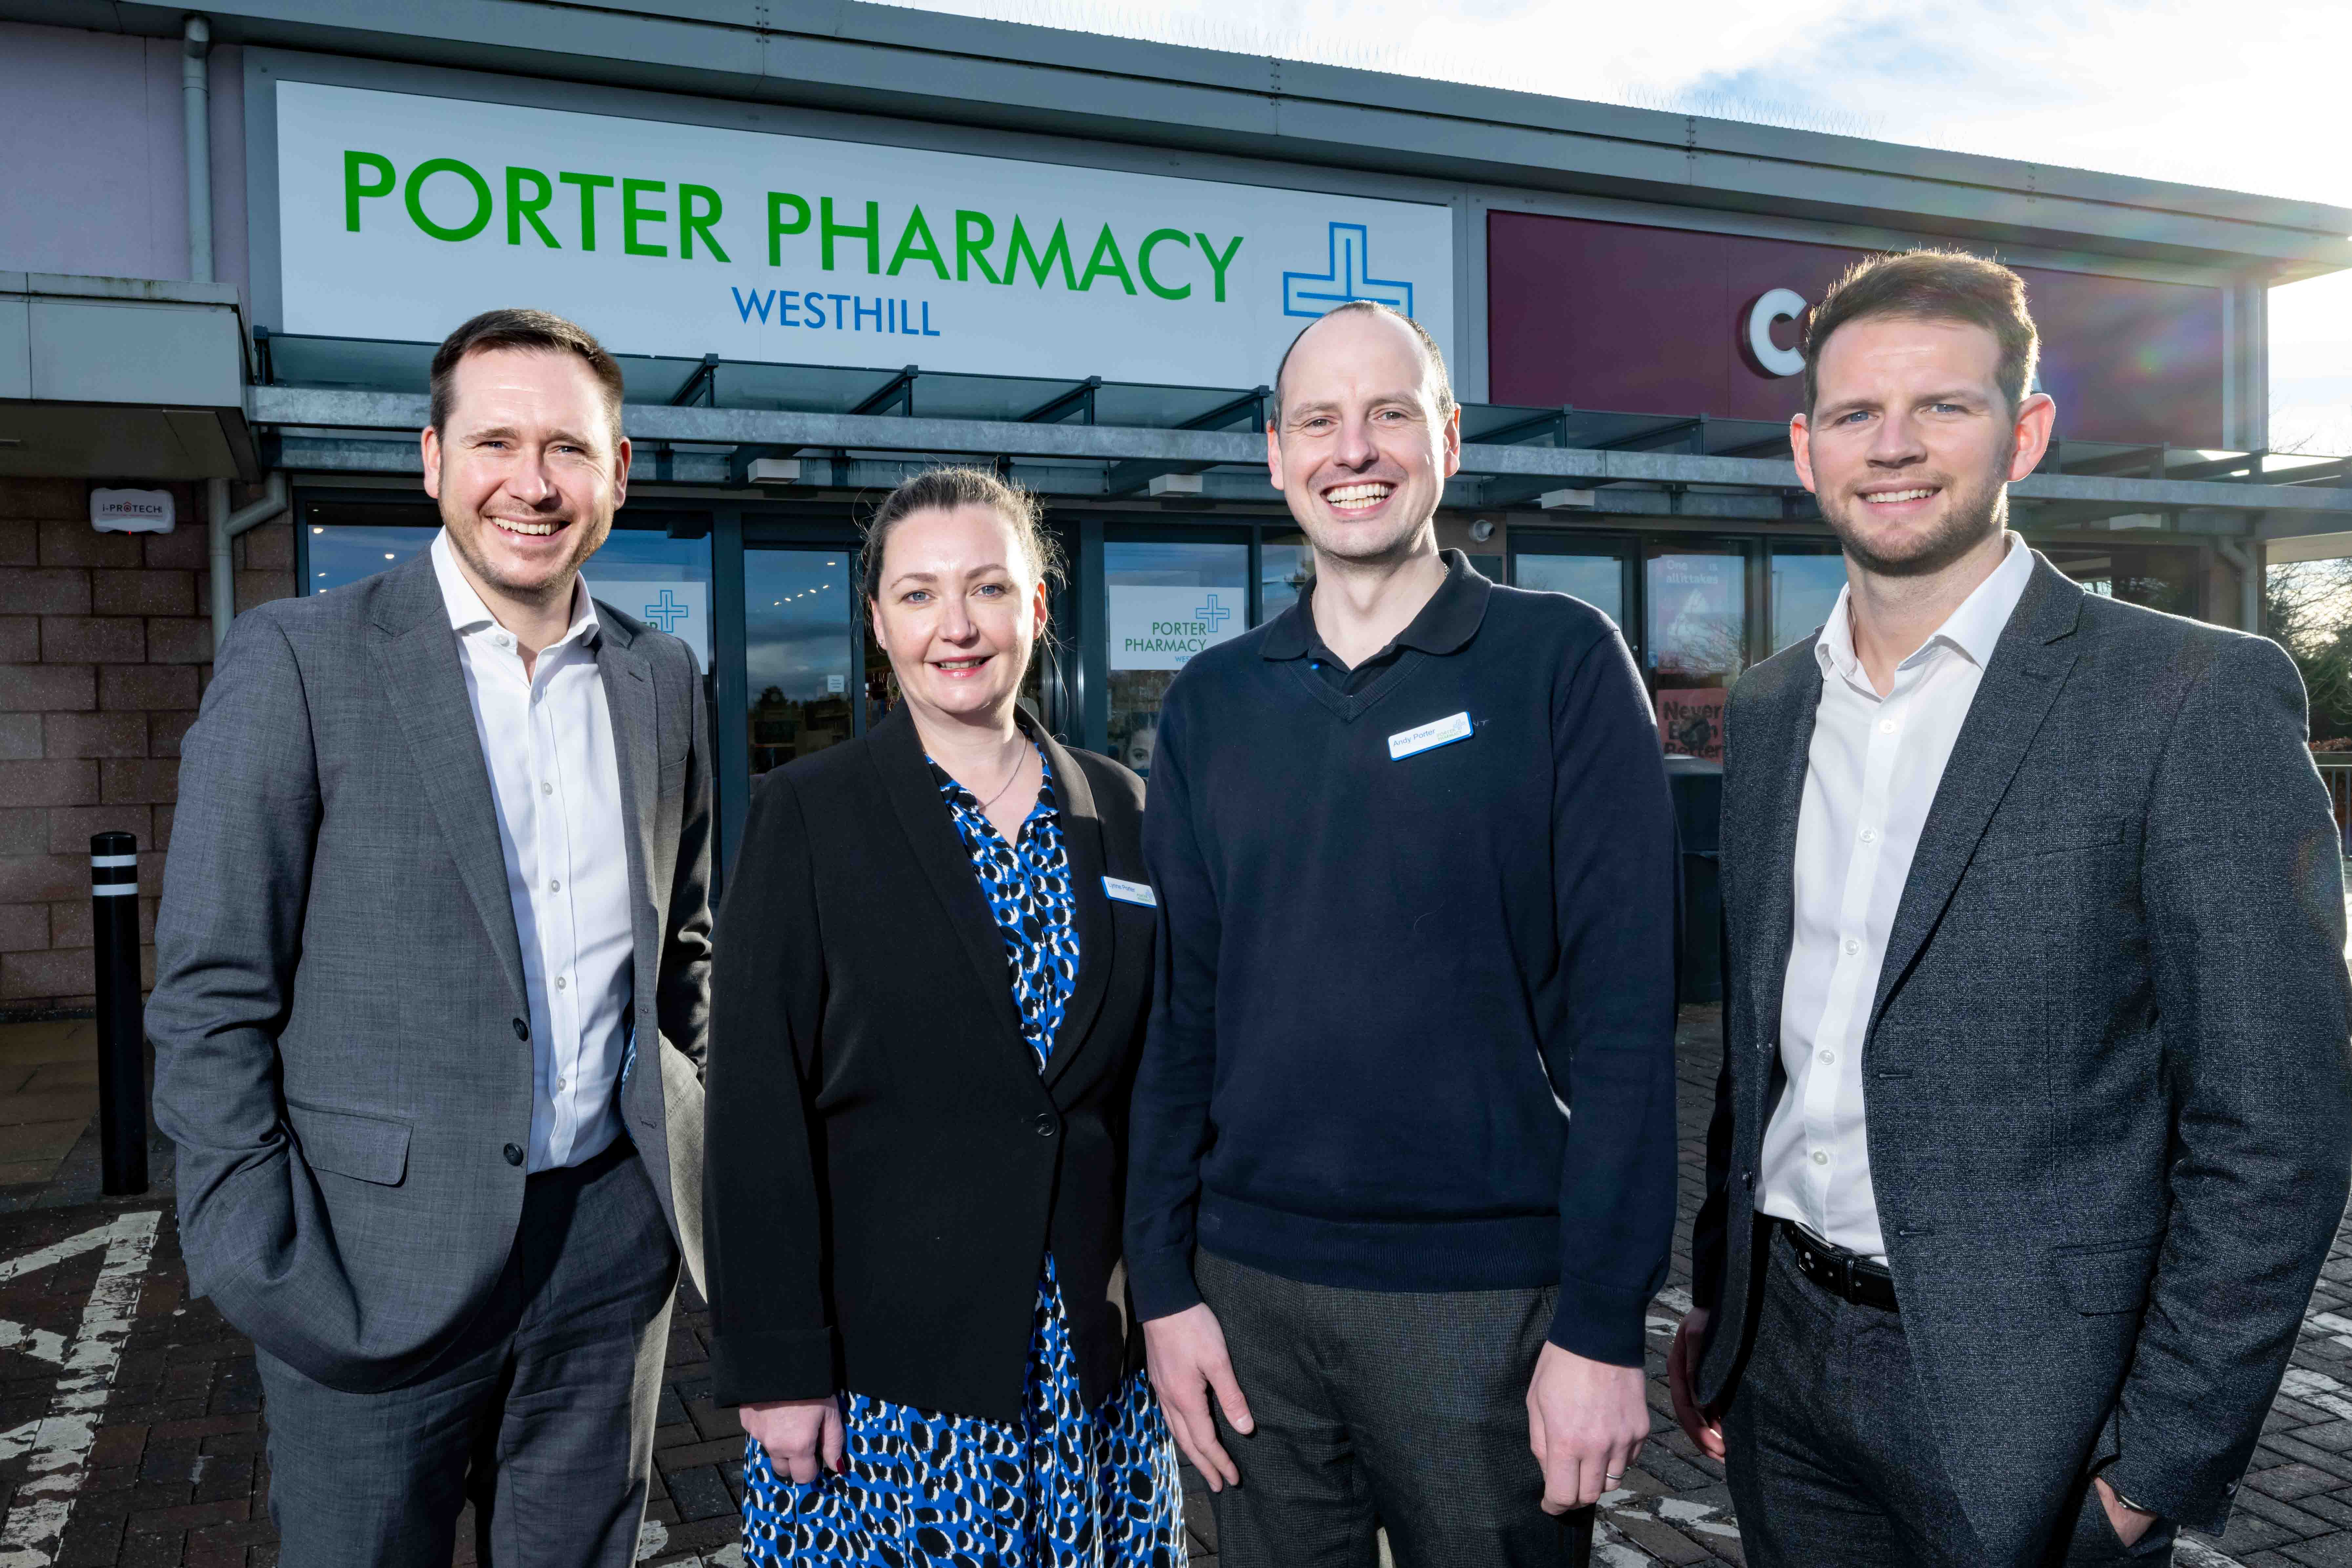 Growing North East pharmacy business expands with new acquisitions  